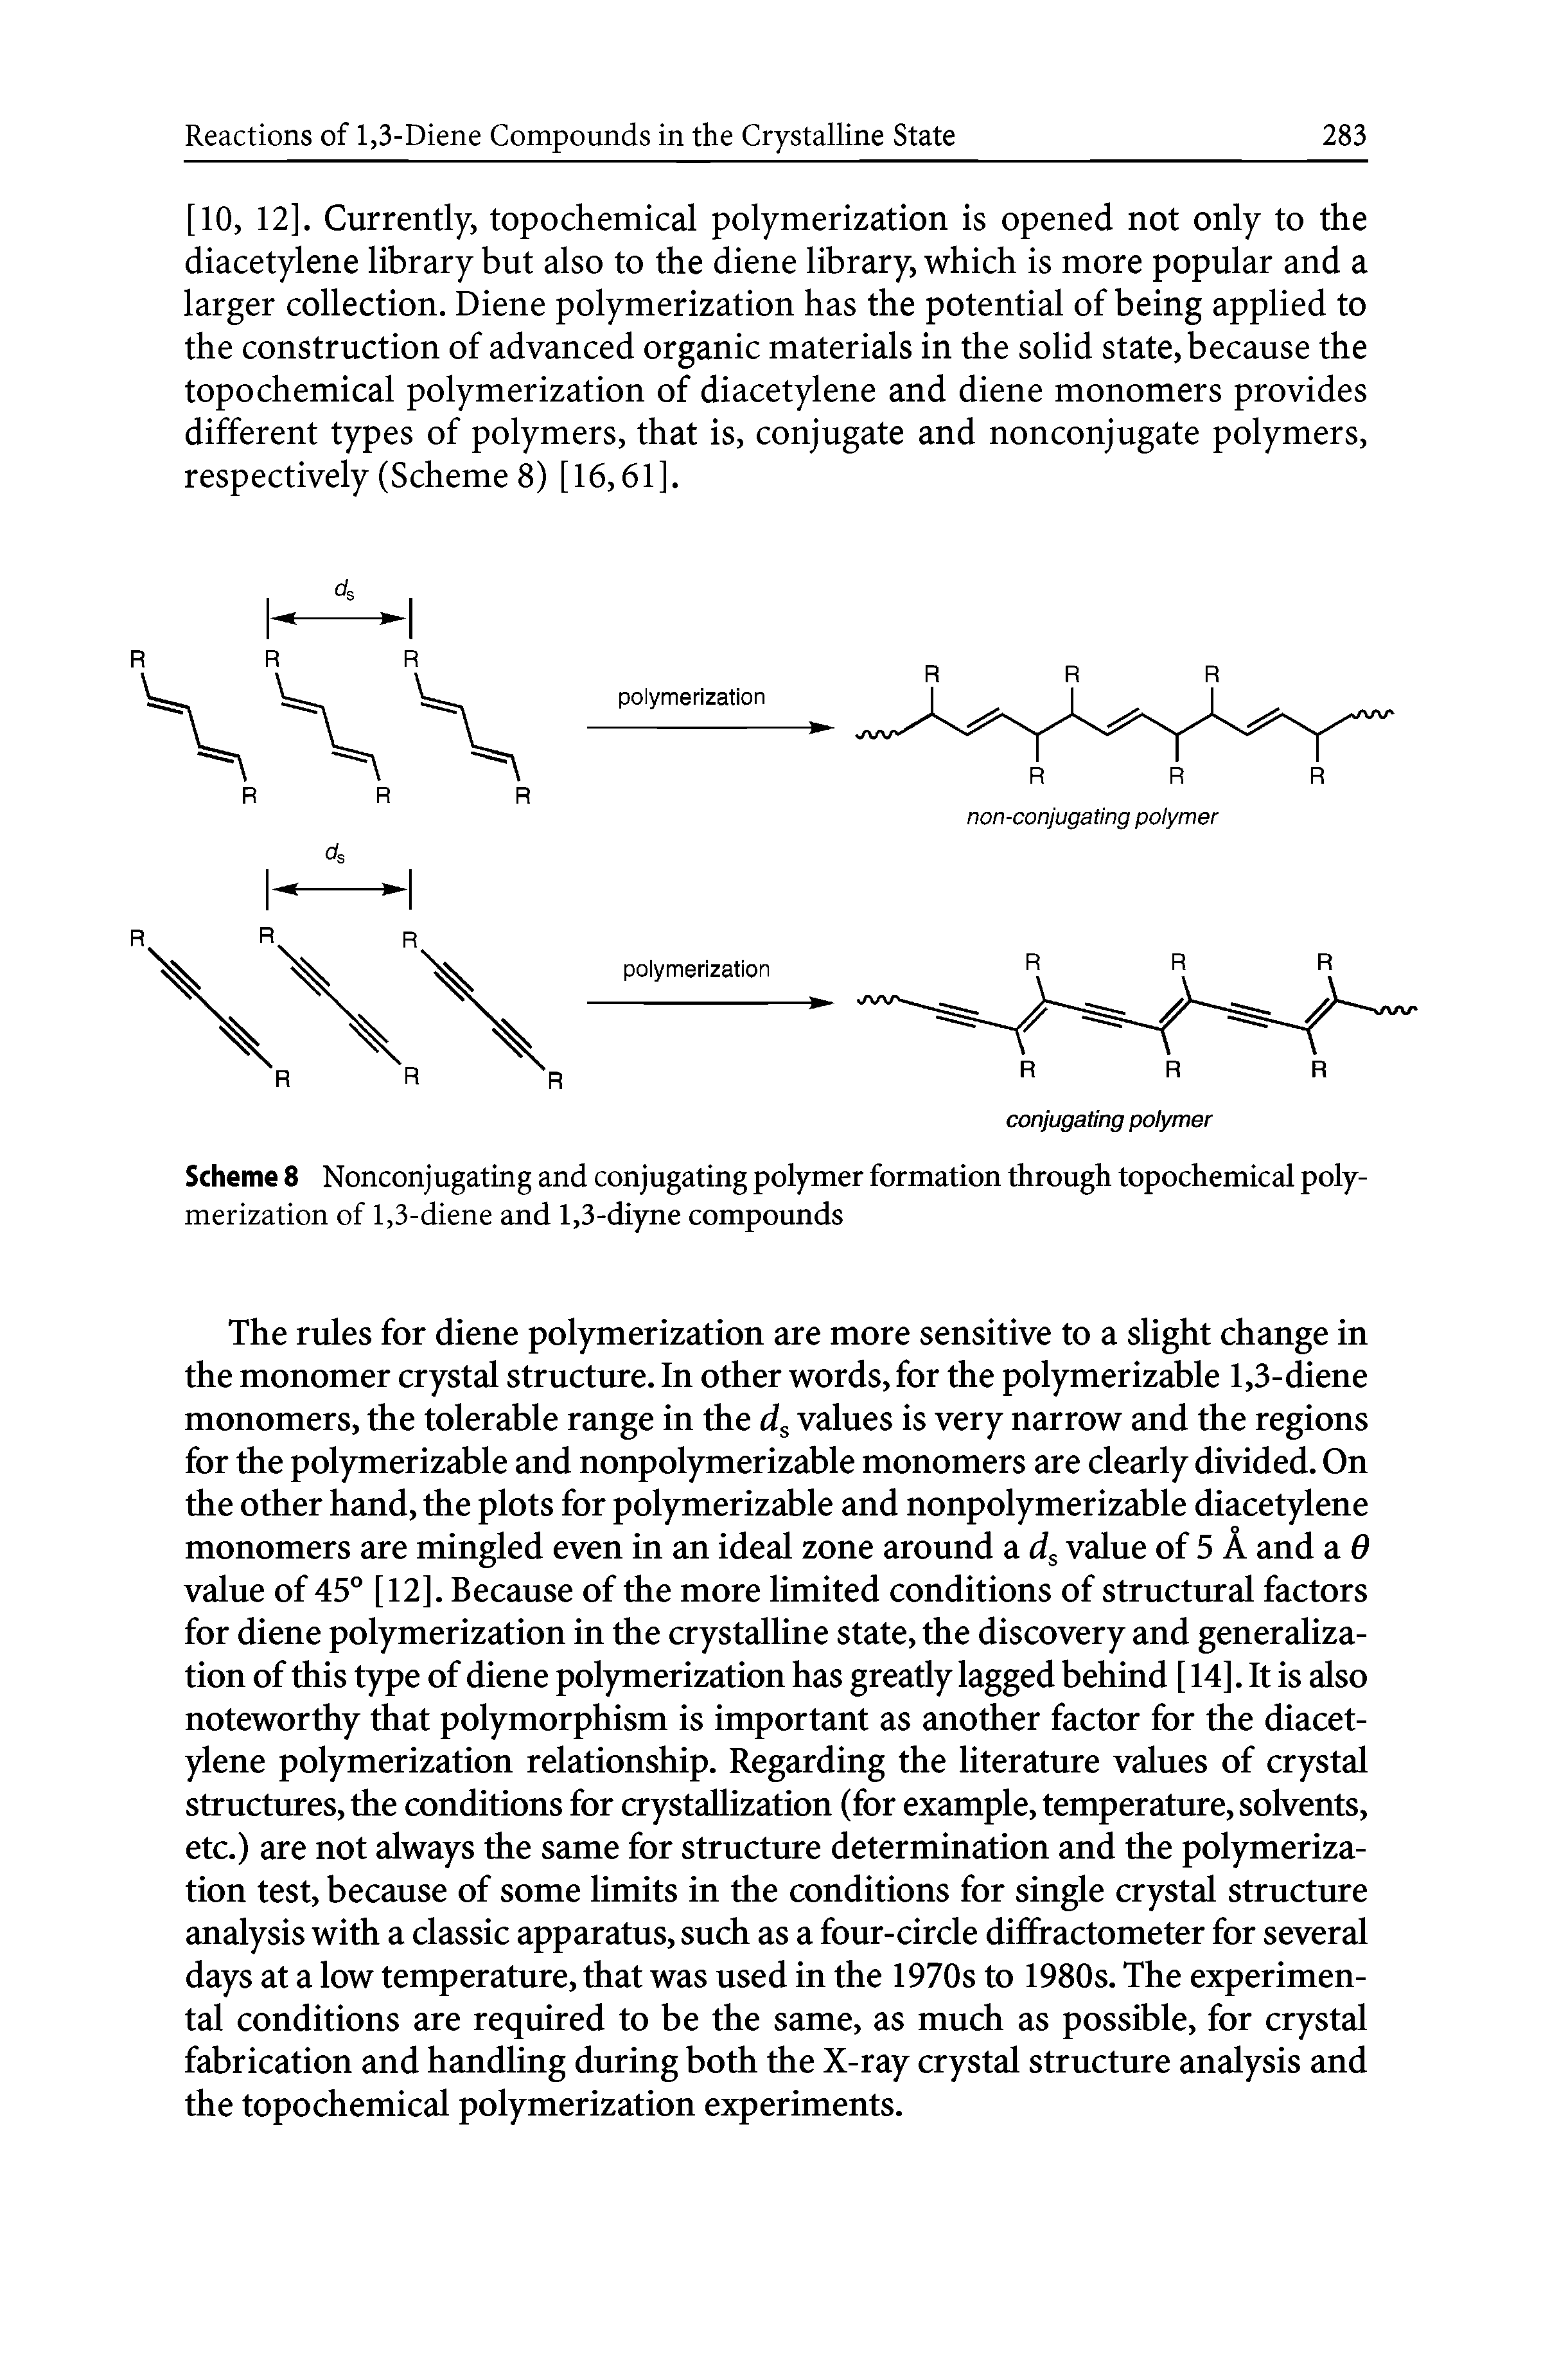 Scheme 8 Nonconjugating and conjugating polymer formation through topochemical polymerization of 1,3-diene and 1,3-diyne compounds...